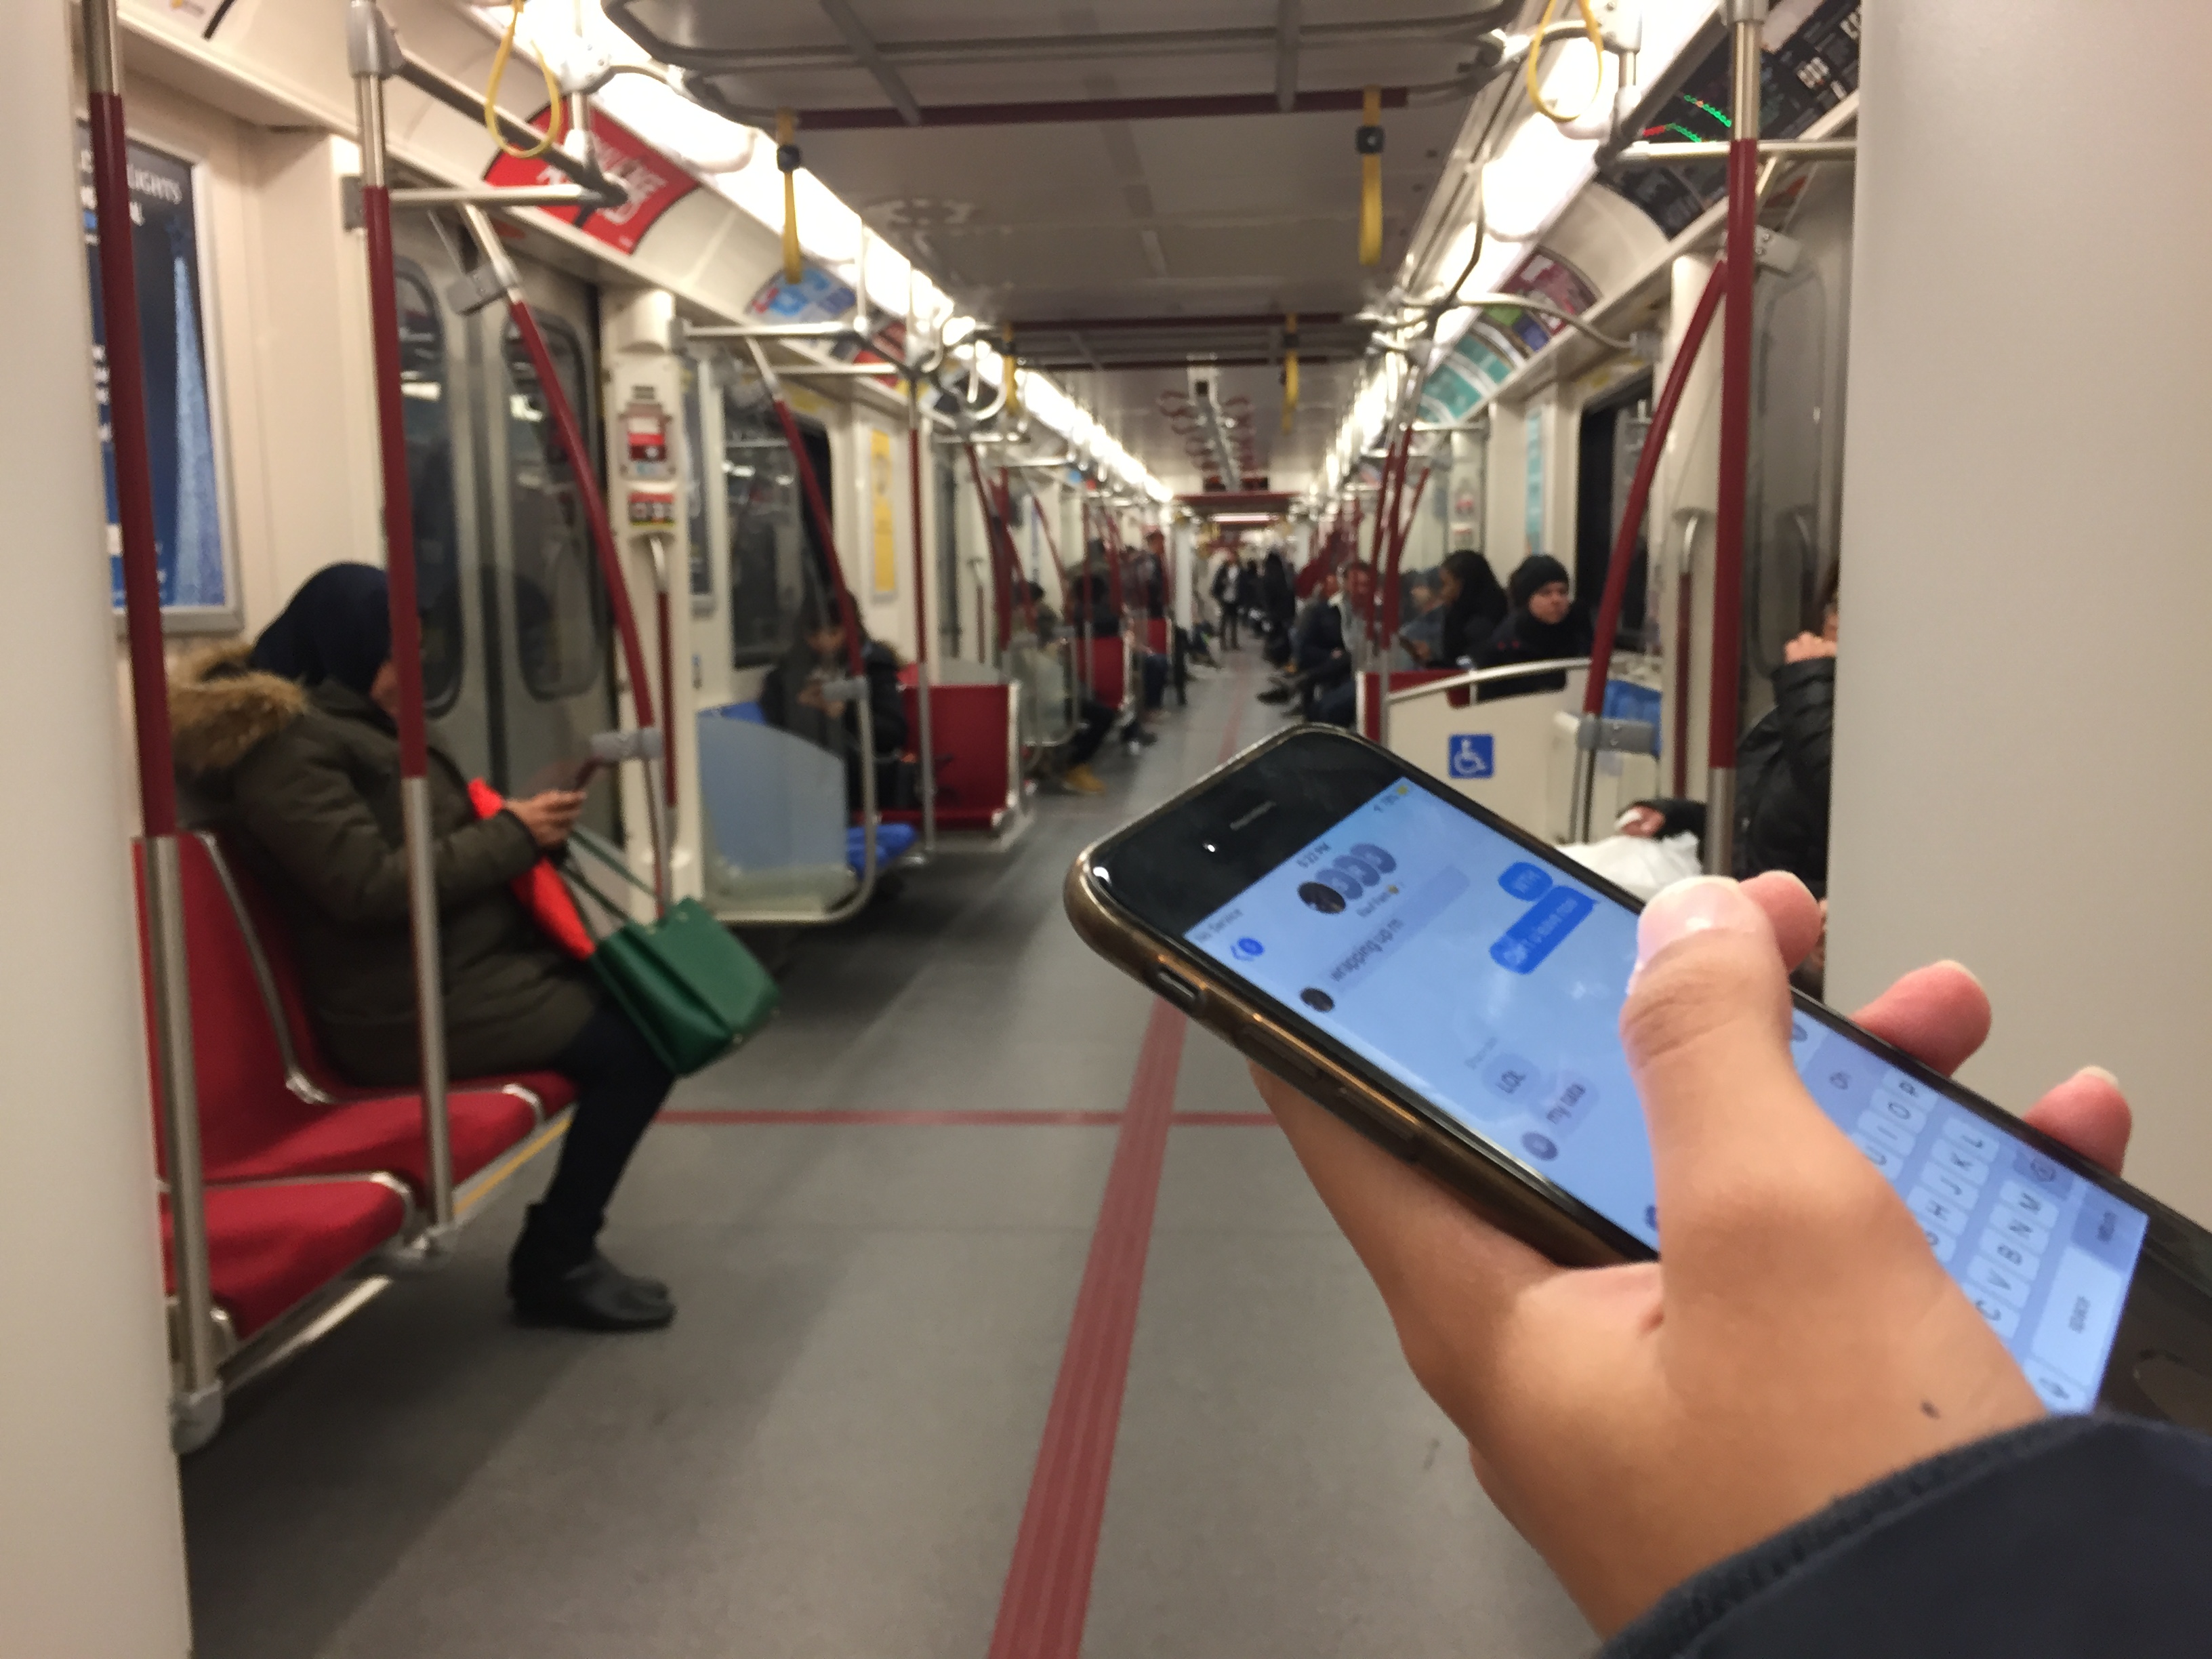 Cell service in the subway system could be available on all platforms, and in certain area within the tunnels.